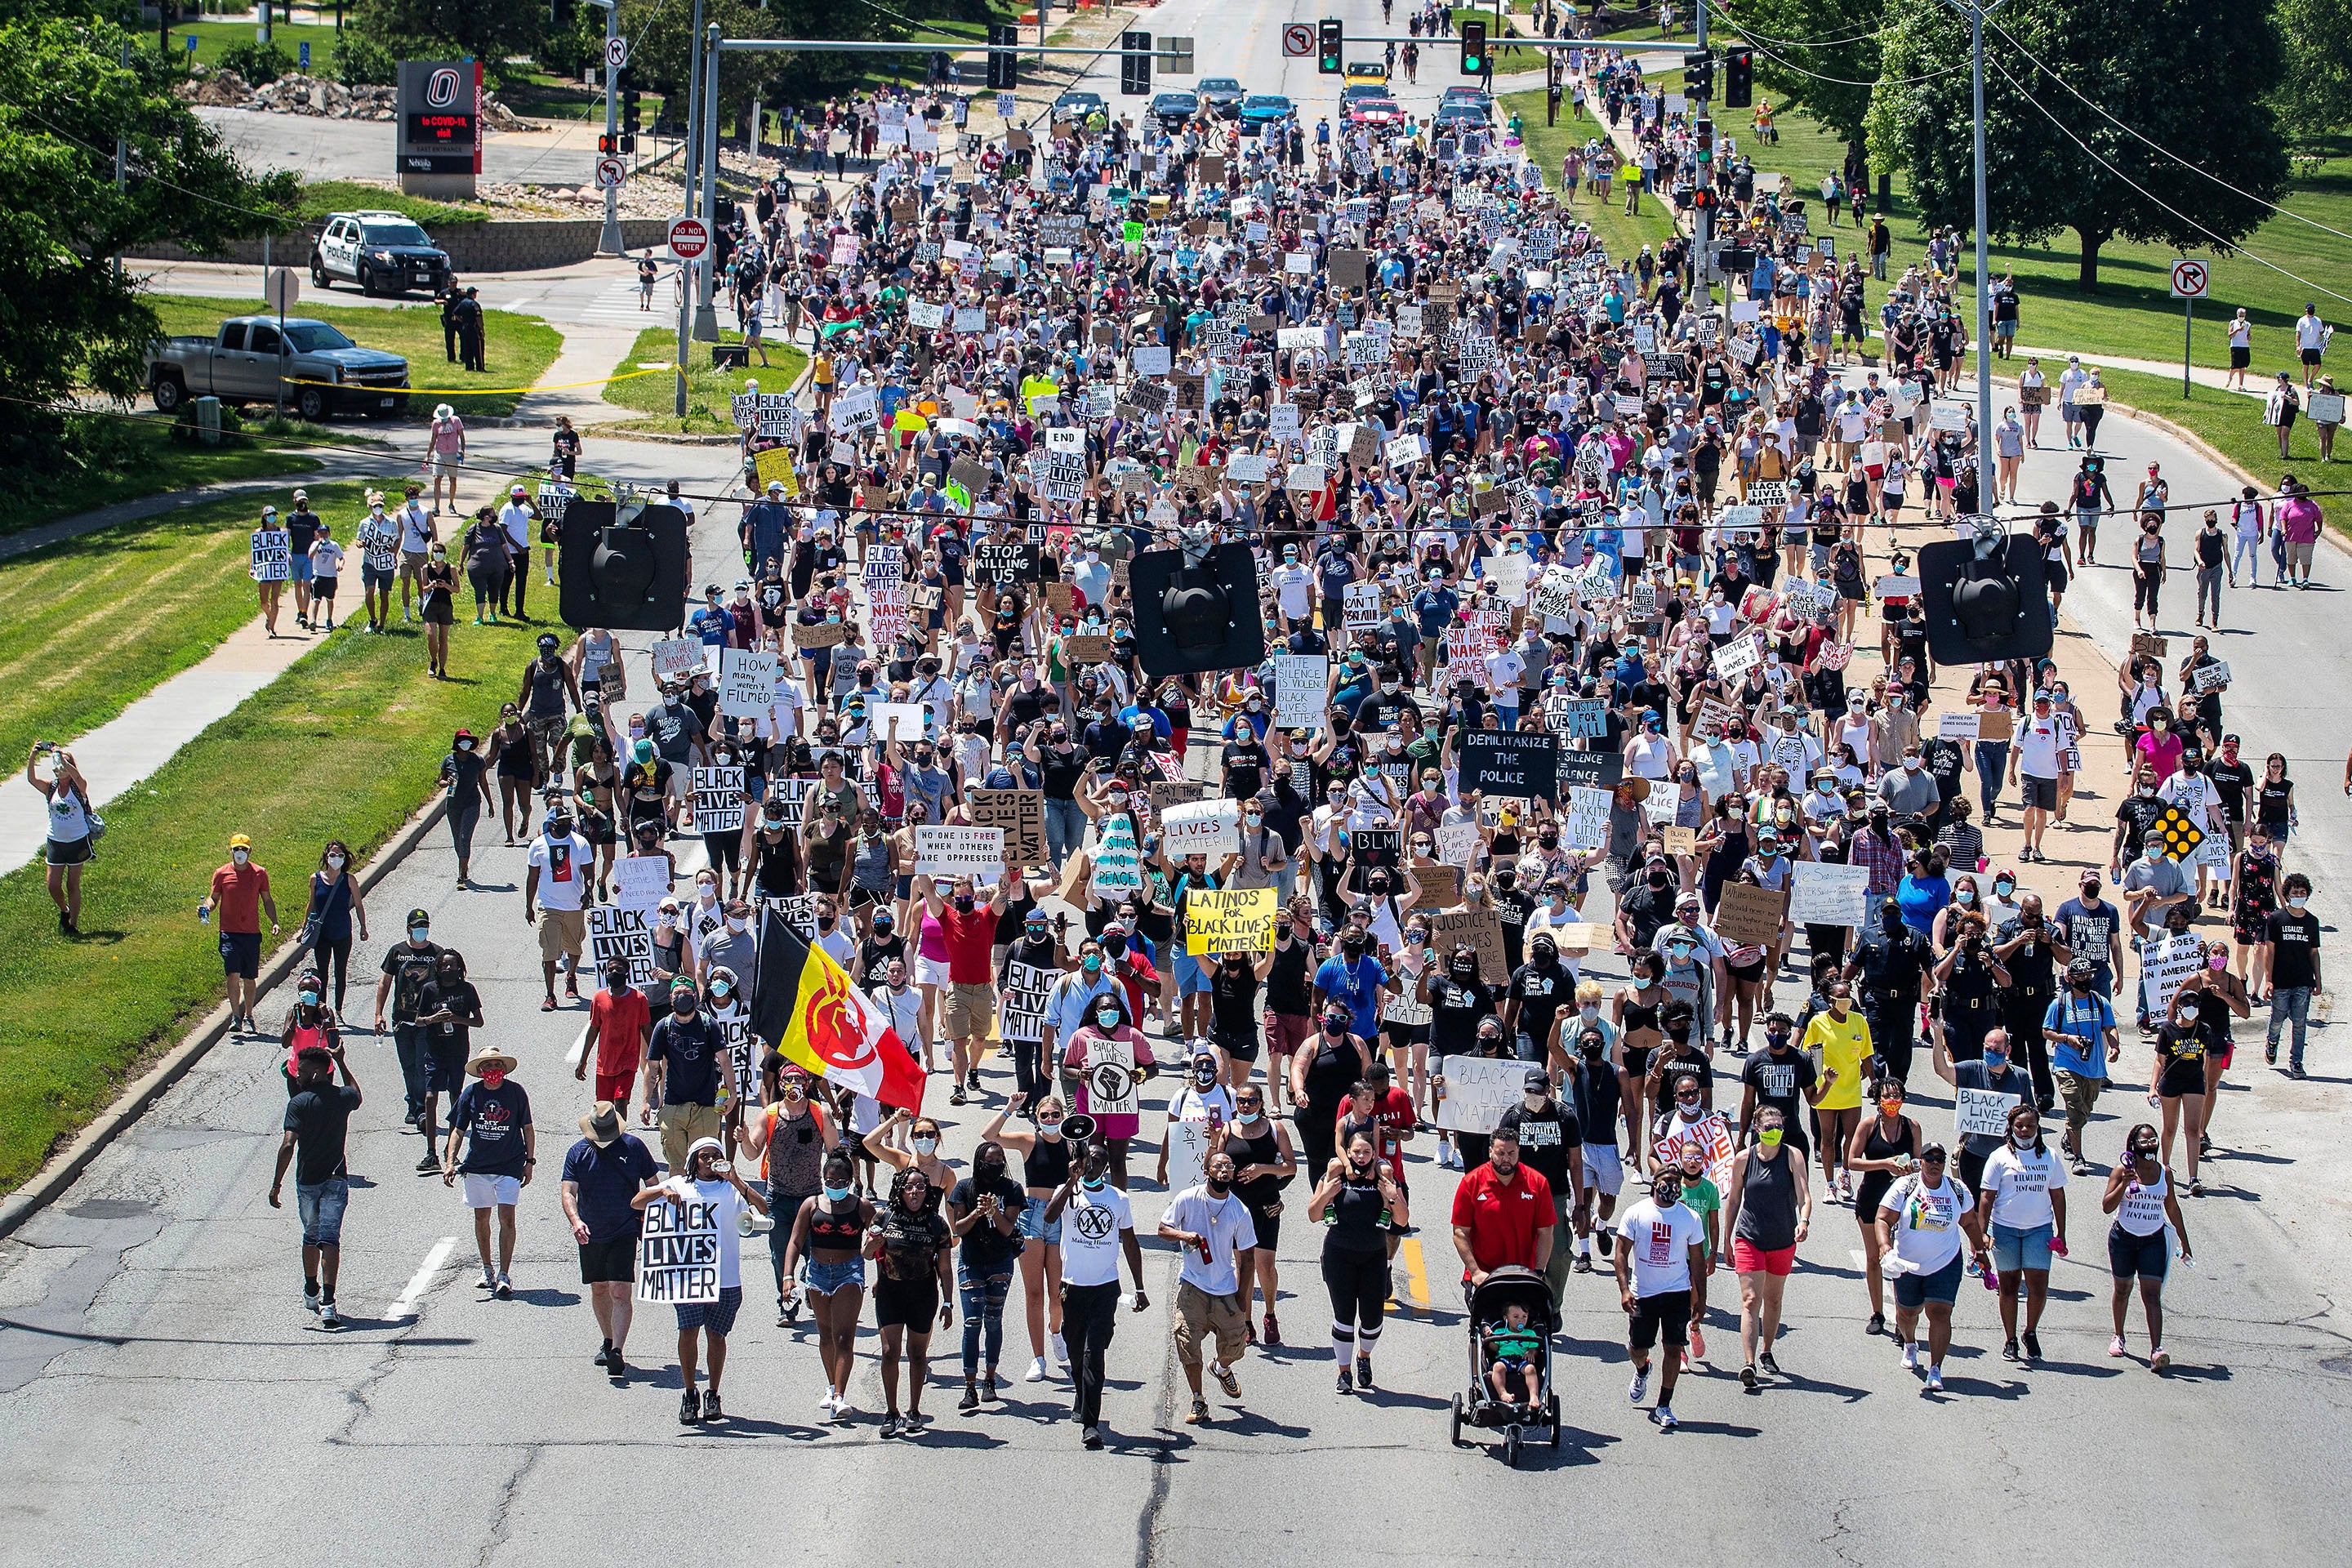 Crowds marched in memory of James Scurlock, who was killed in Omaha, Nebraska amid protests